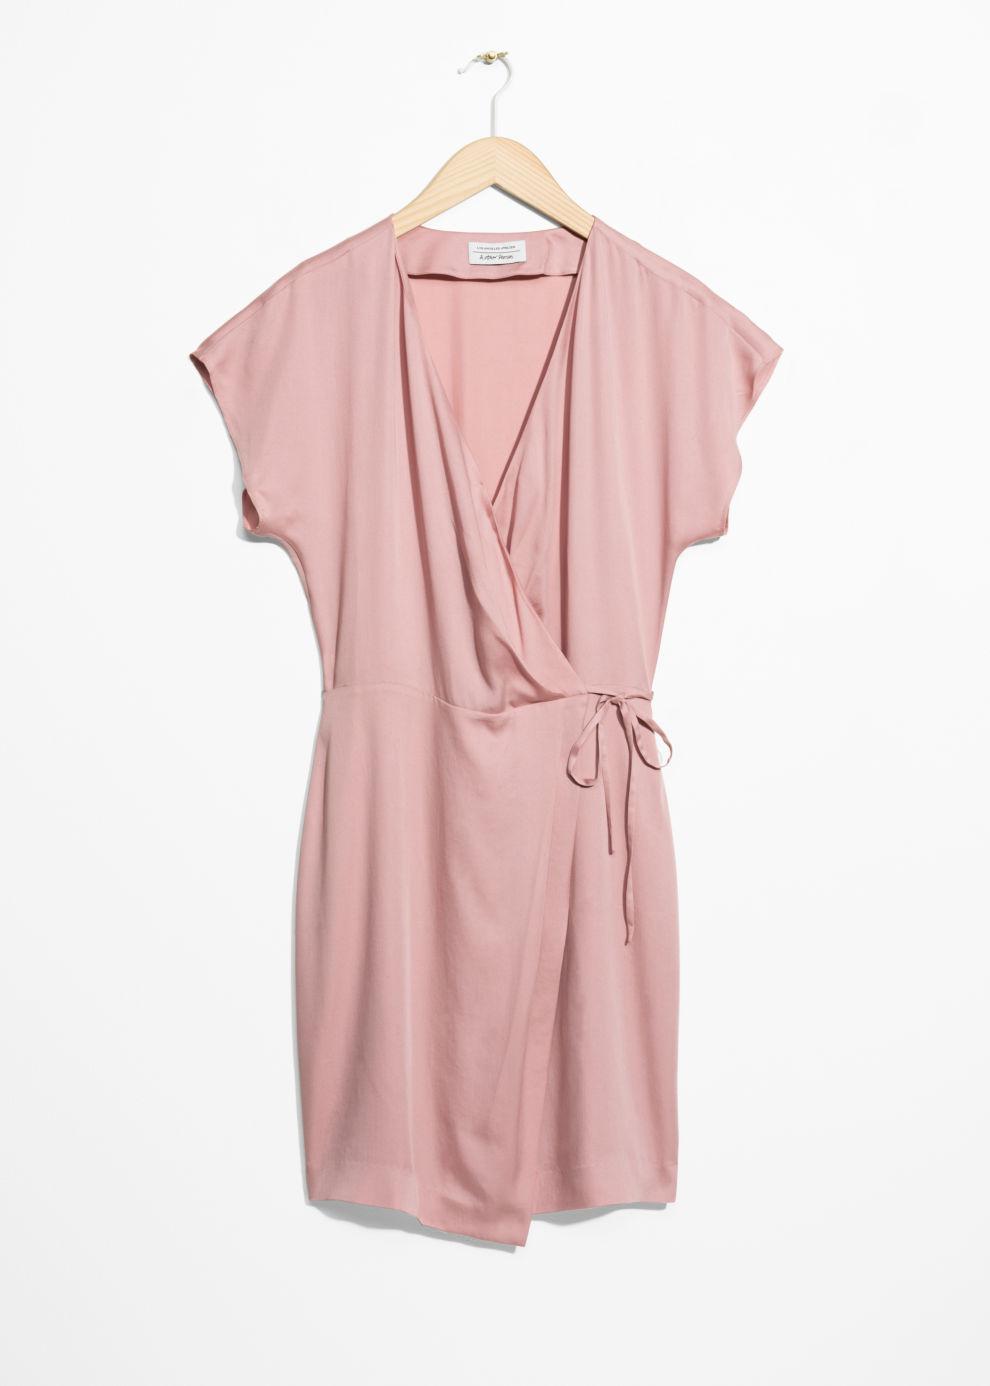 \u0026 Other Stories Wrap Dress in Pink - Lyst